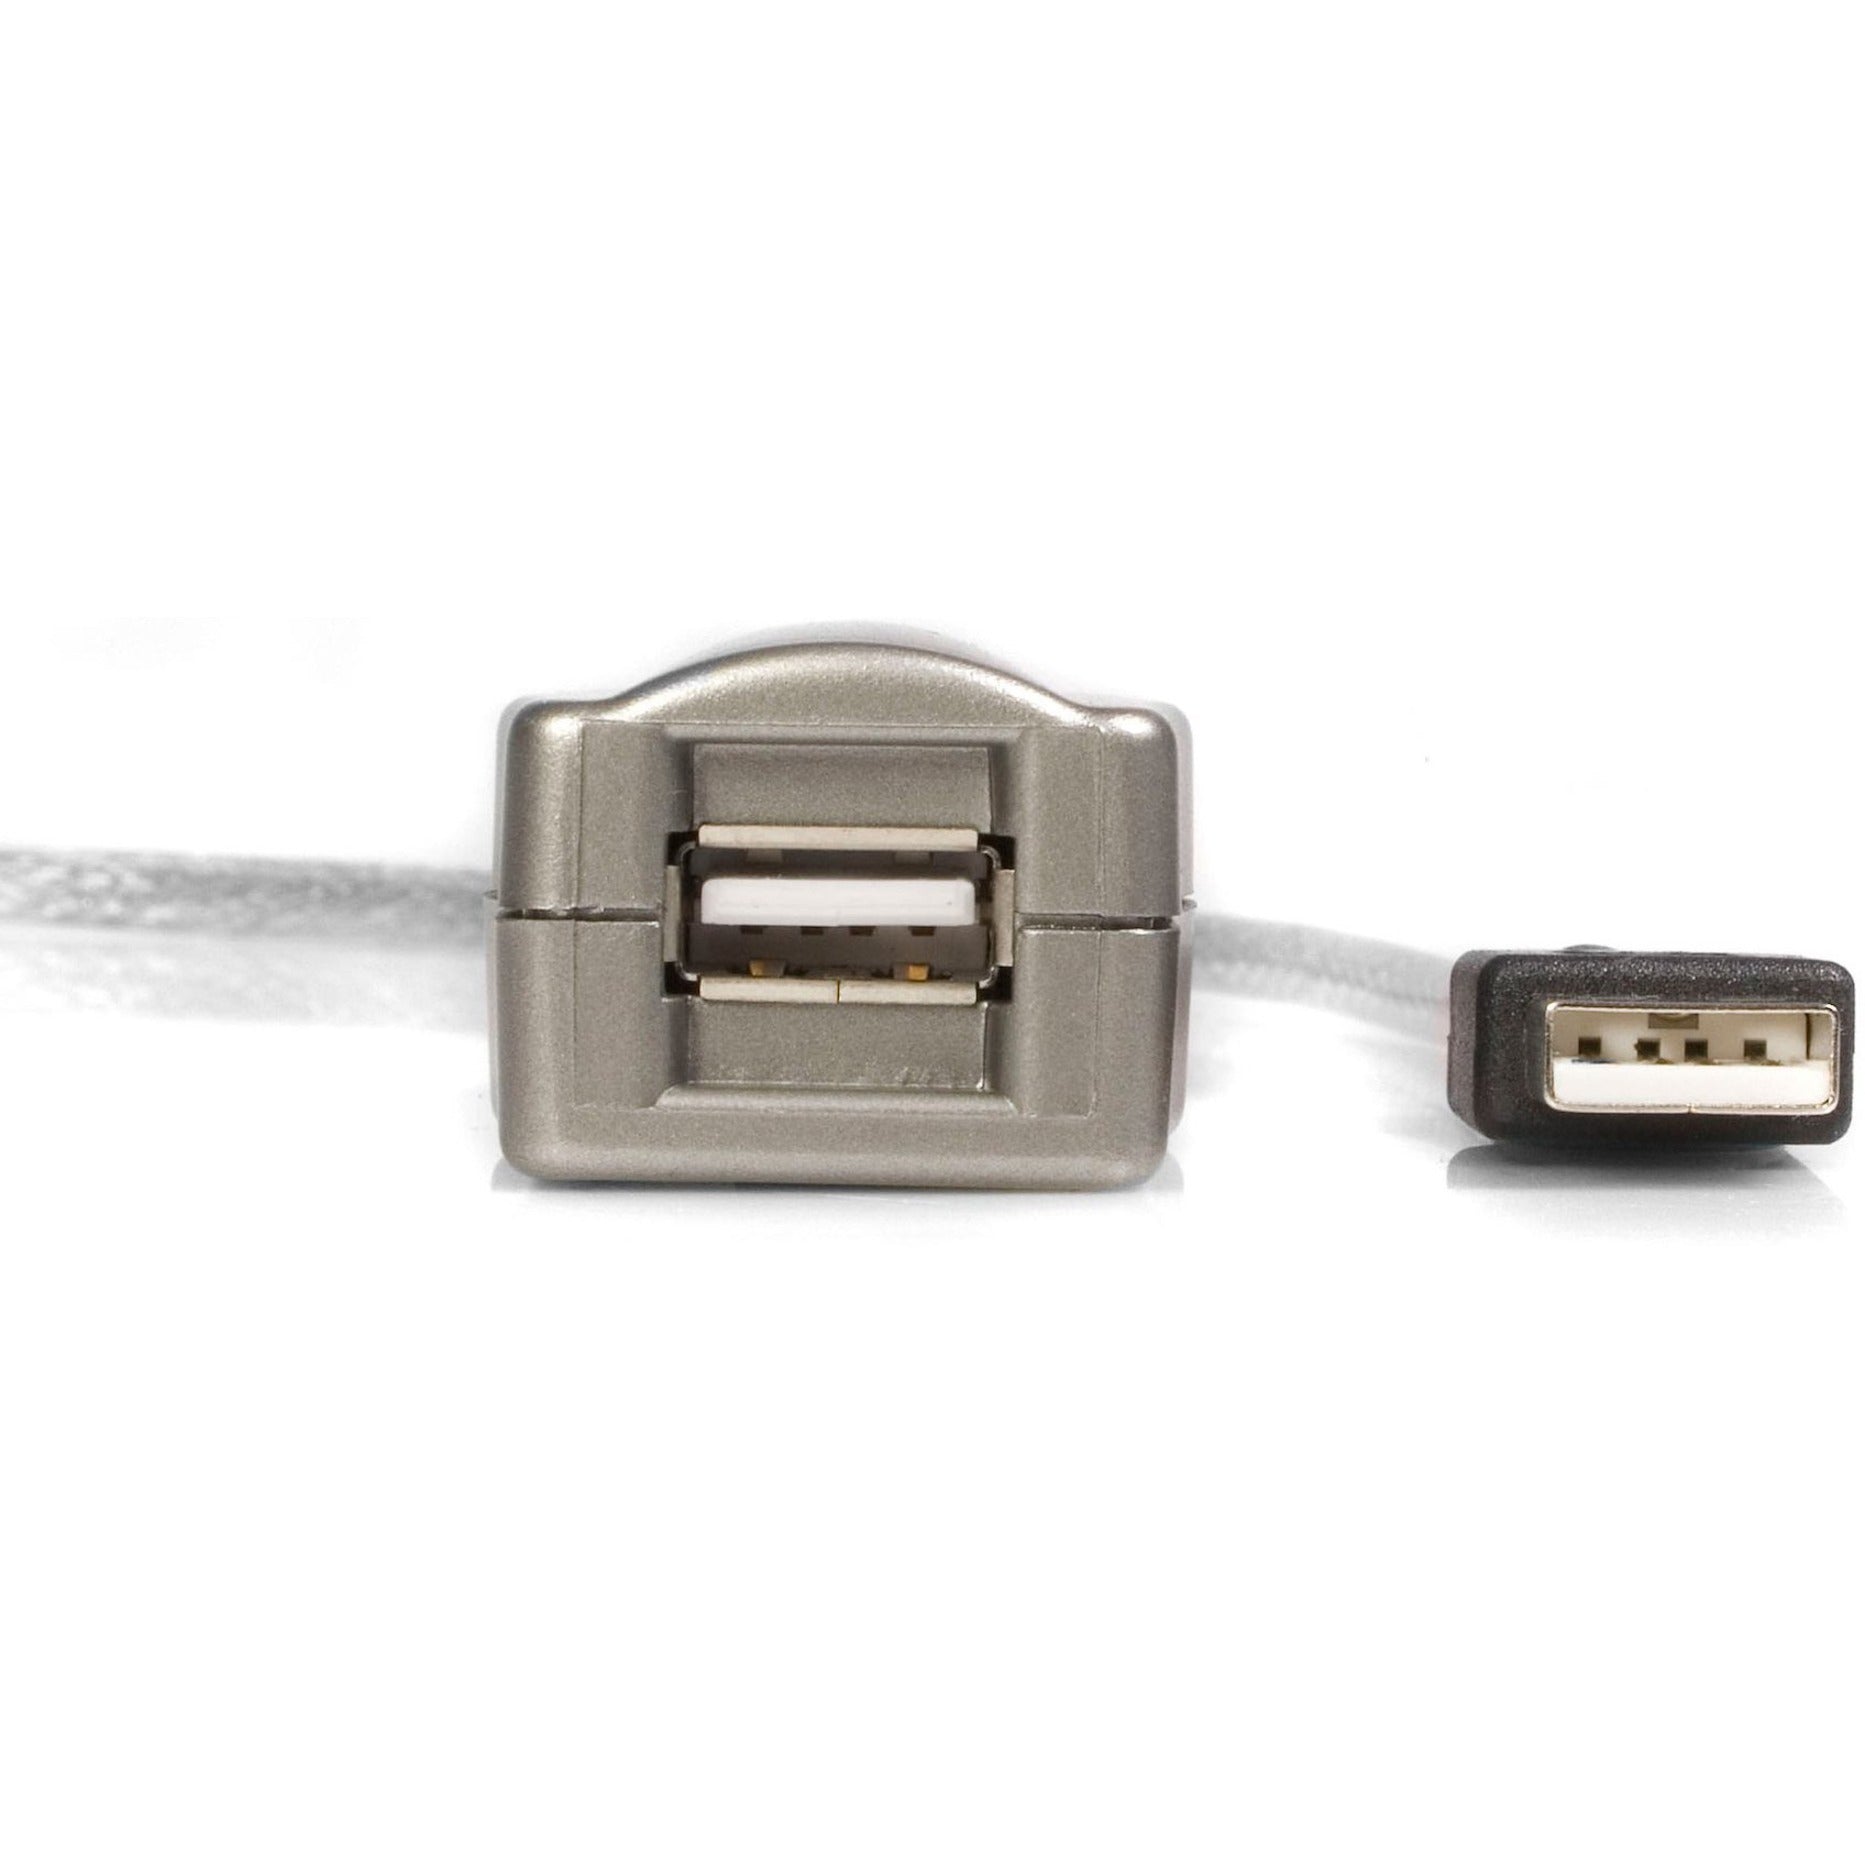 StarTech.com USB2FAAEXT15 15 ft USB 2.0 Active Extension Cable - M/F, Extend USB Connections up to 80ft, Plug & Play, No External Power Required